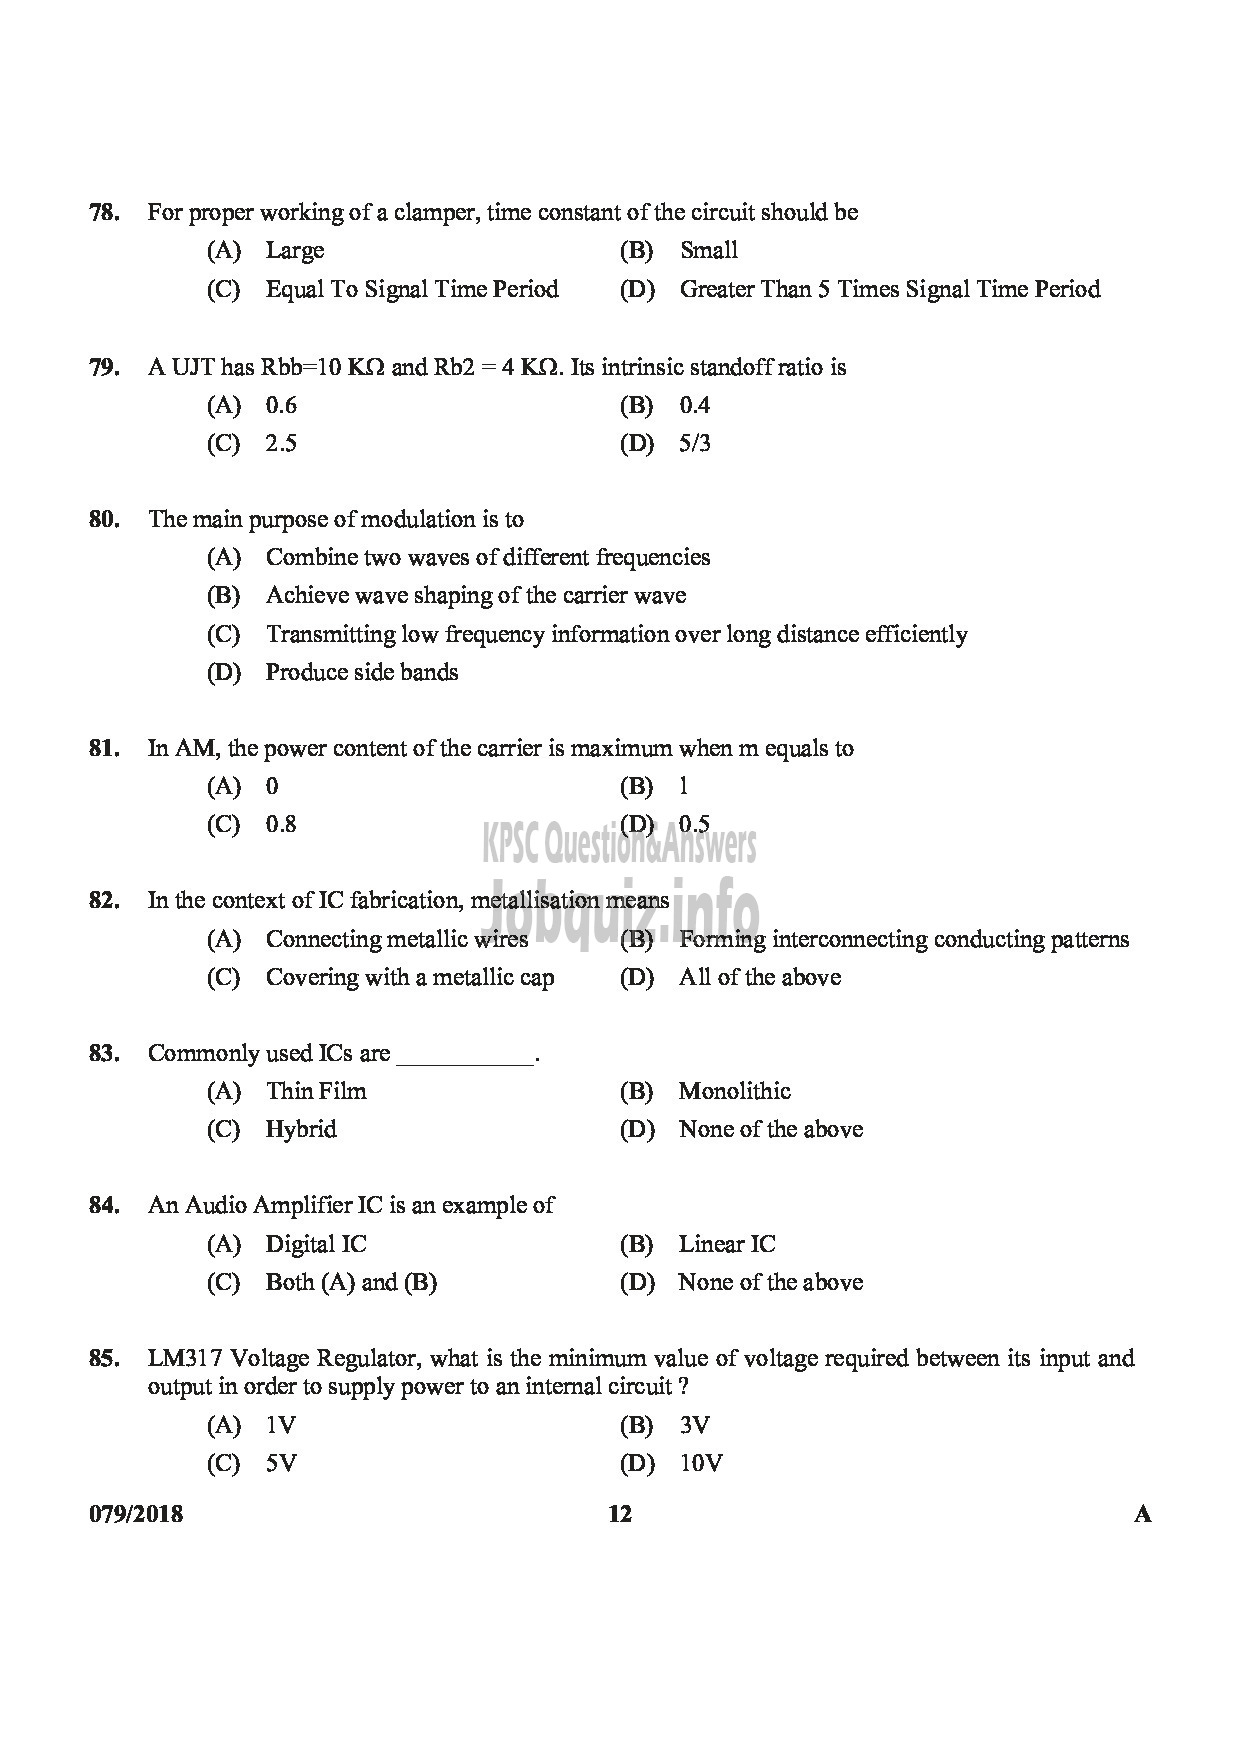 Kerala PSC Question Paper - JUNIOR INSTRUCTOR ELECTRONIC MECHANIC INDUSTRIAL TRAINING-12